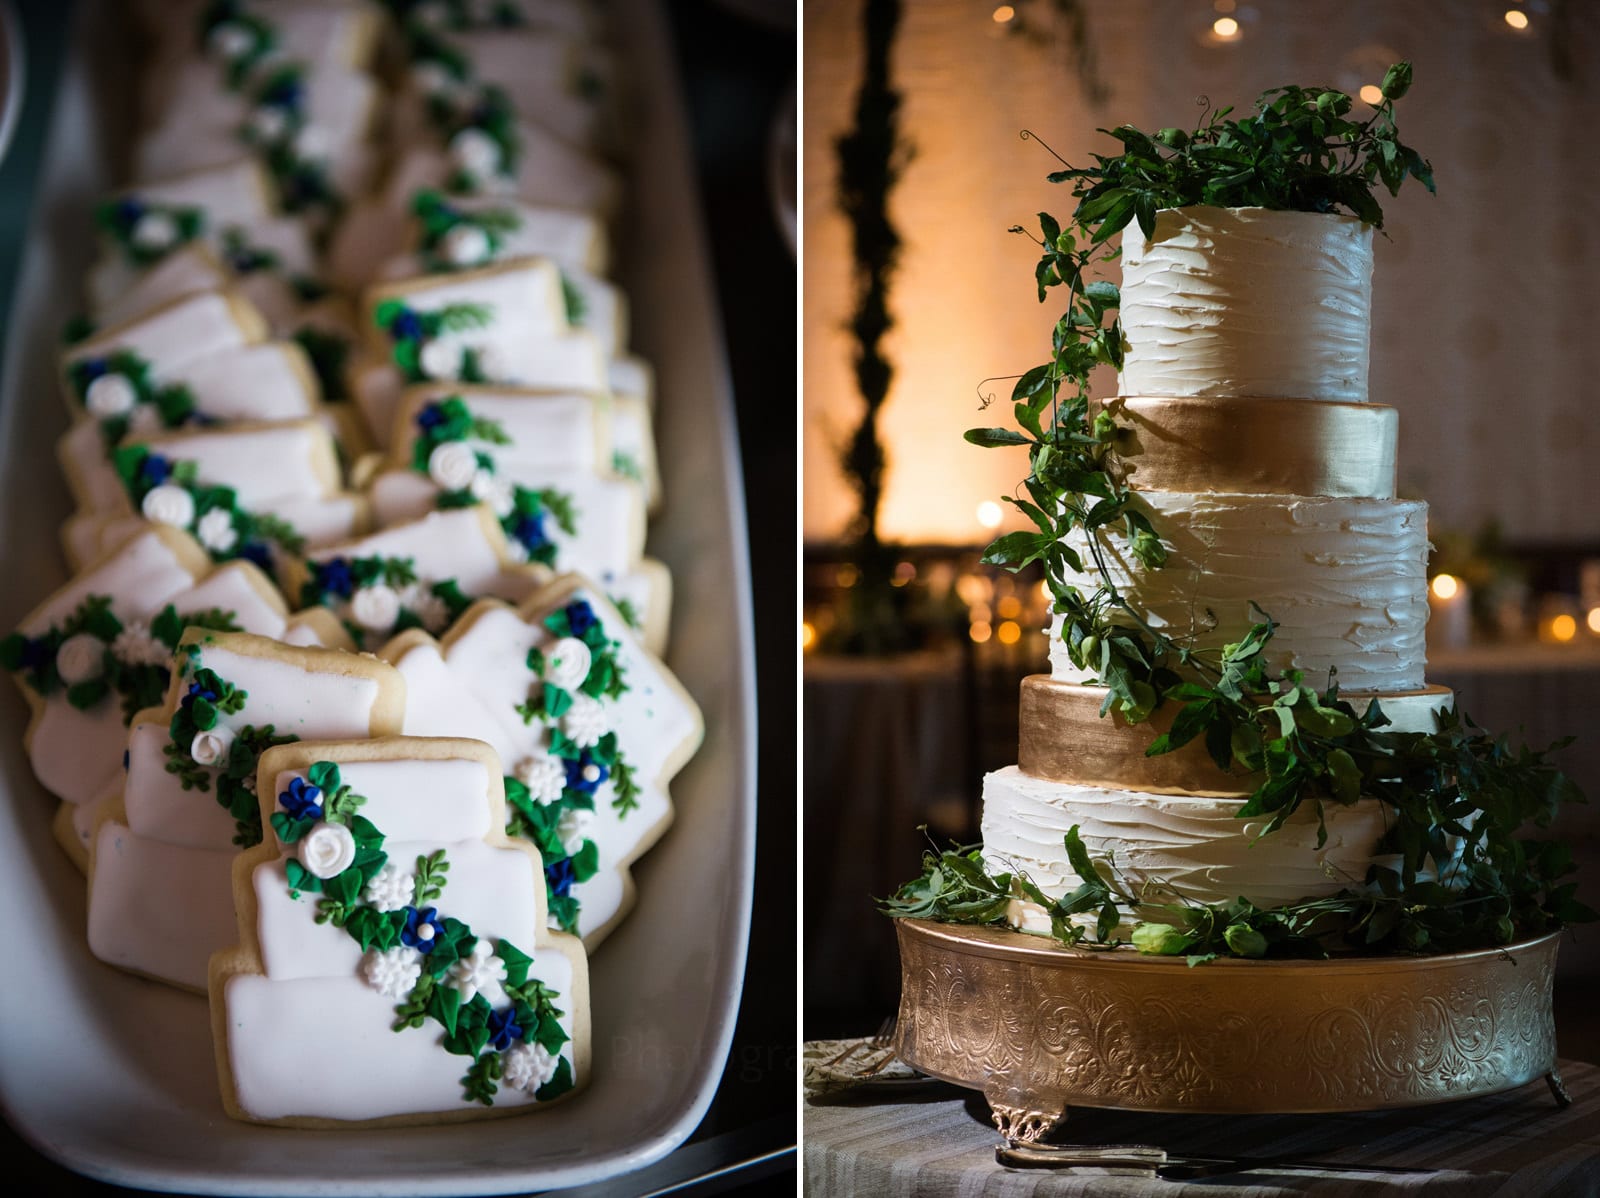 A wedding cake and cookies that look like that wedding cake at Wedding Photography at Fairmont Hotel Pittsburgh.